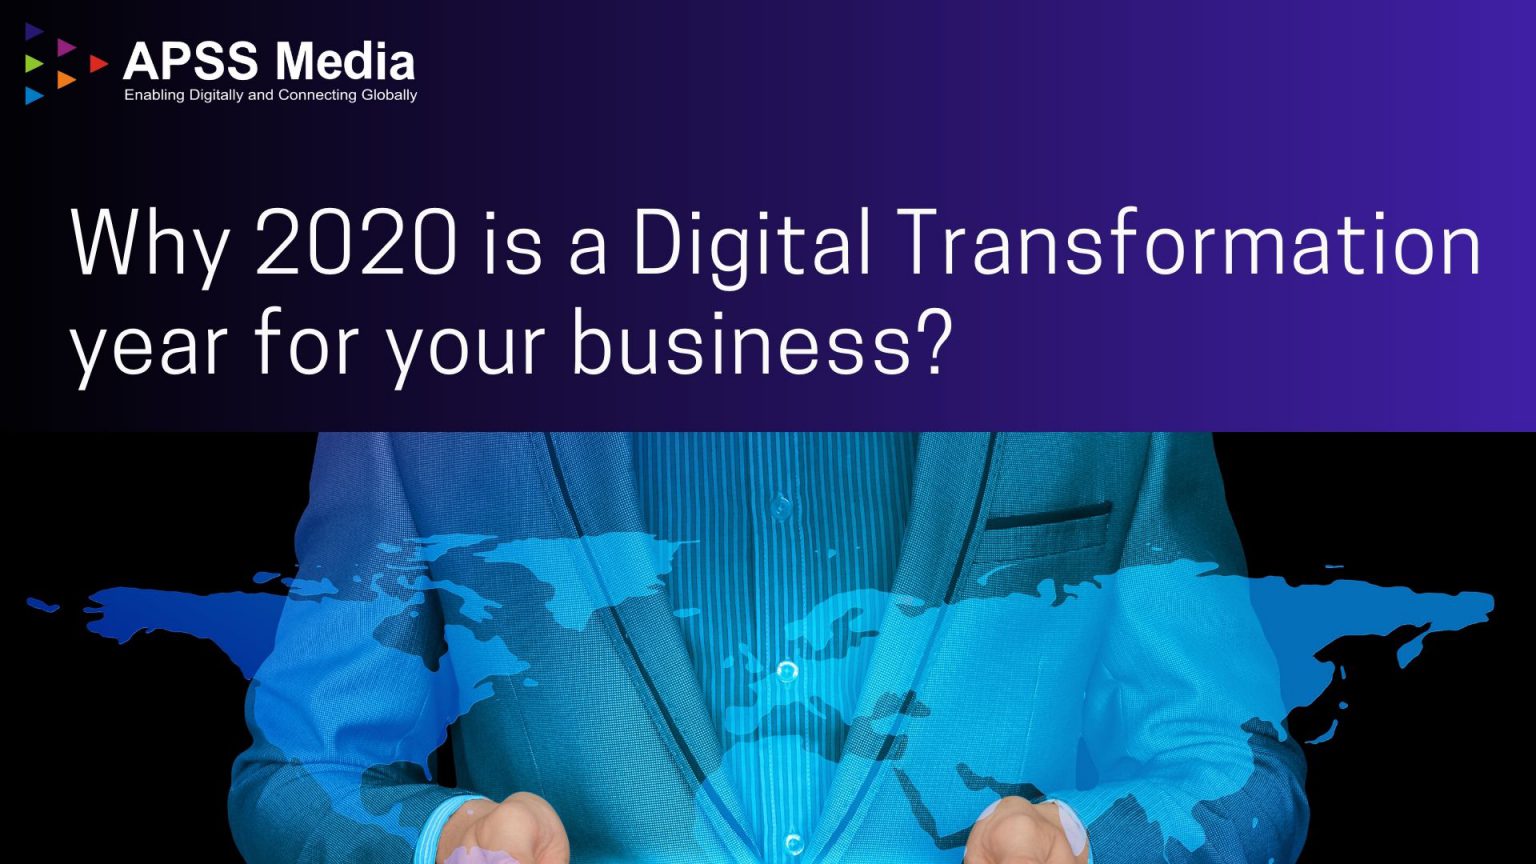 Why 2020 is a Digital Transformation year for your business? - APSS Media